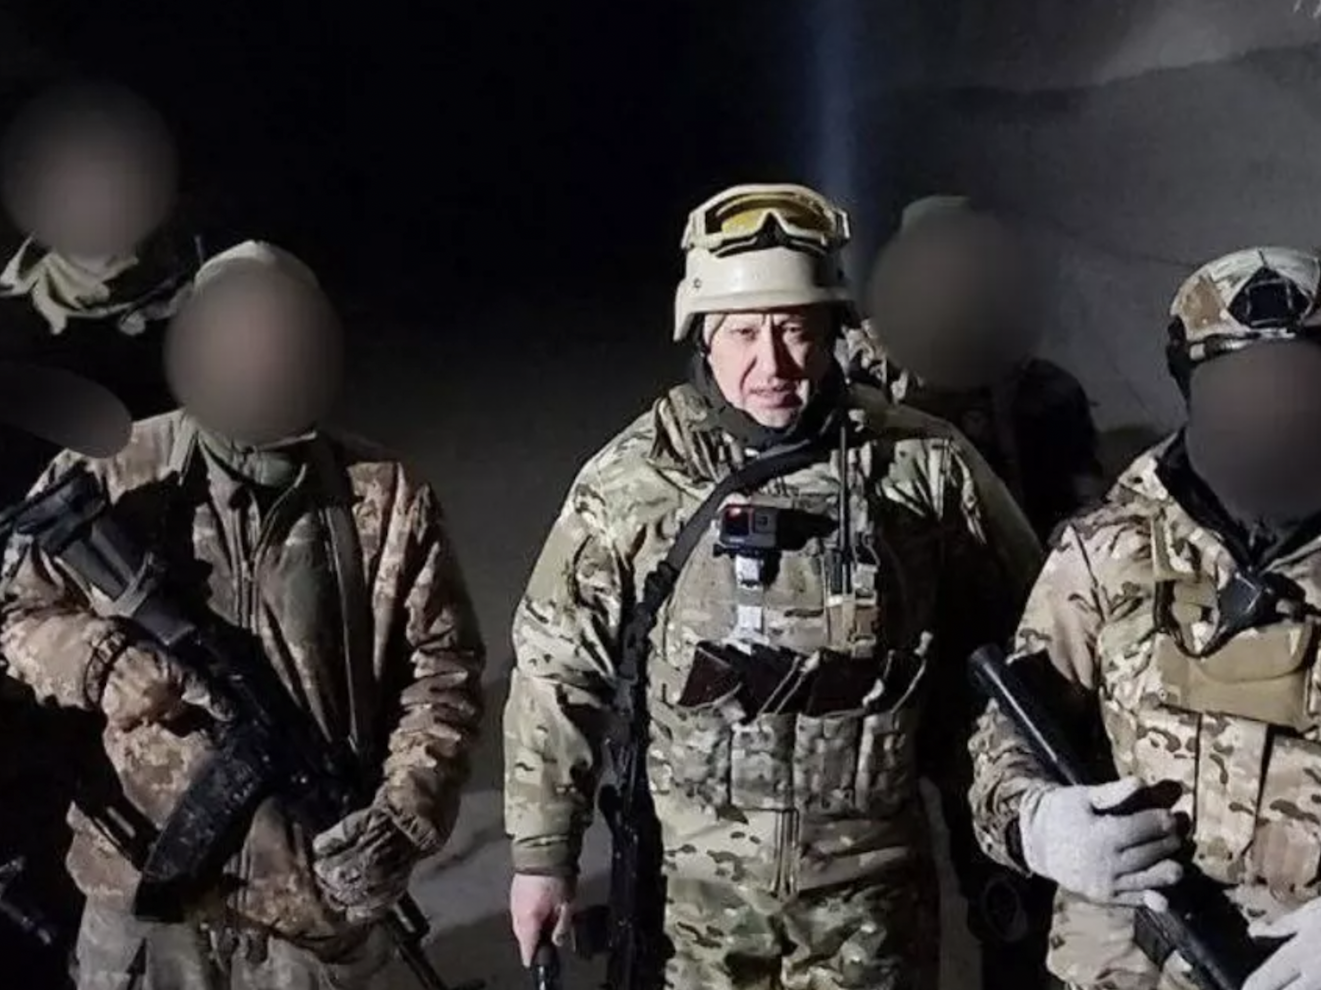 Wagner Group chief Yevgeny Prigozhin in military gear with several others, whose faces have been blurred, in what Russian state media described as the salt mines of Soledar, eastern Ukraine, on January 10 2022.